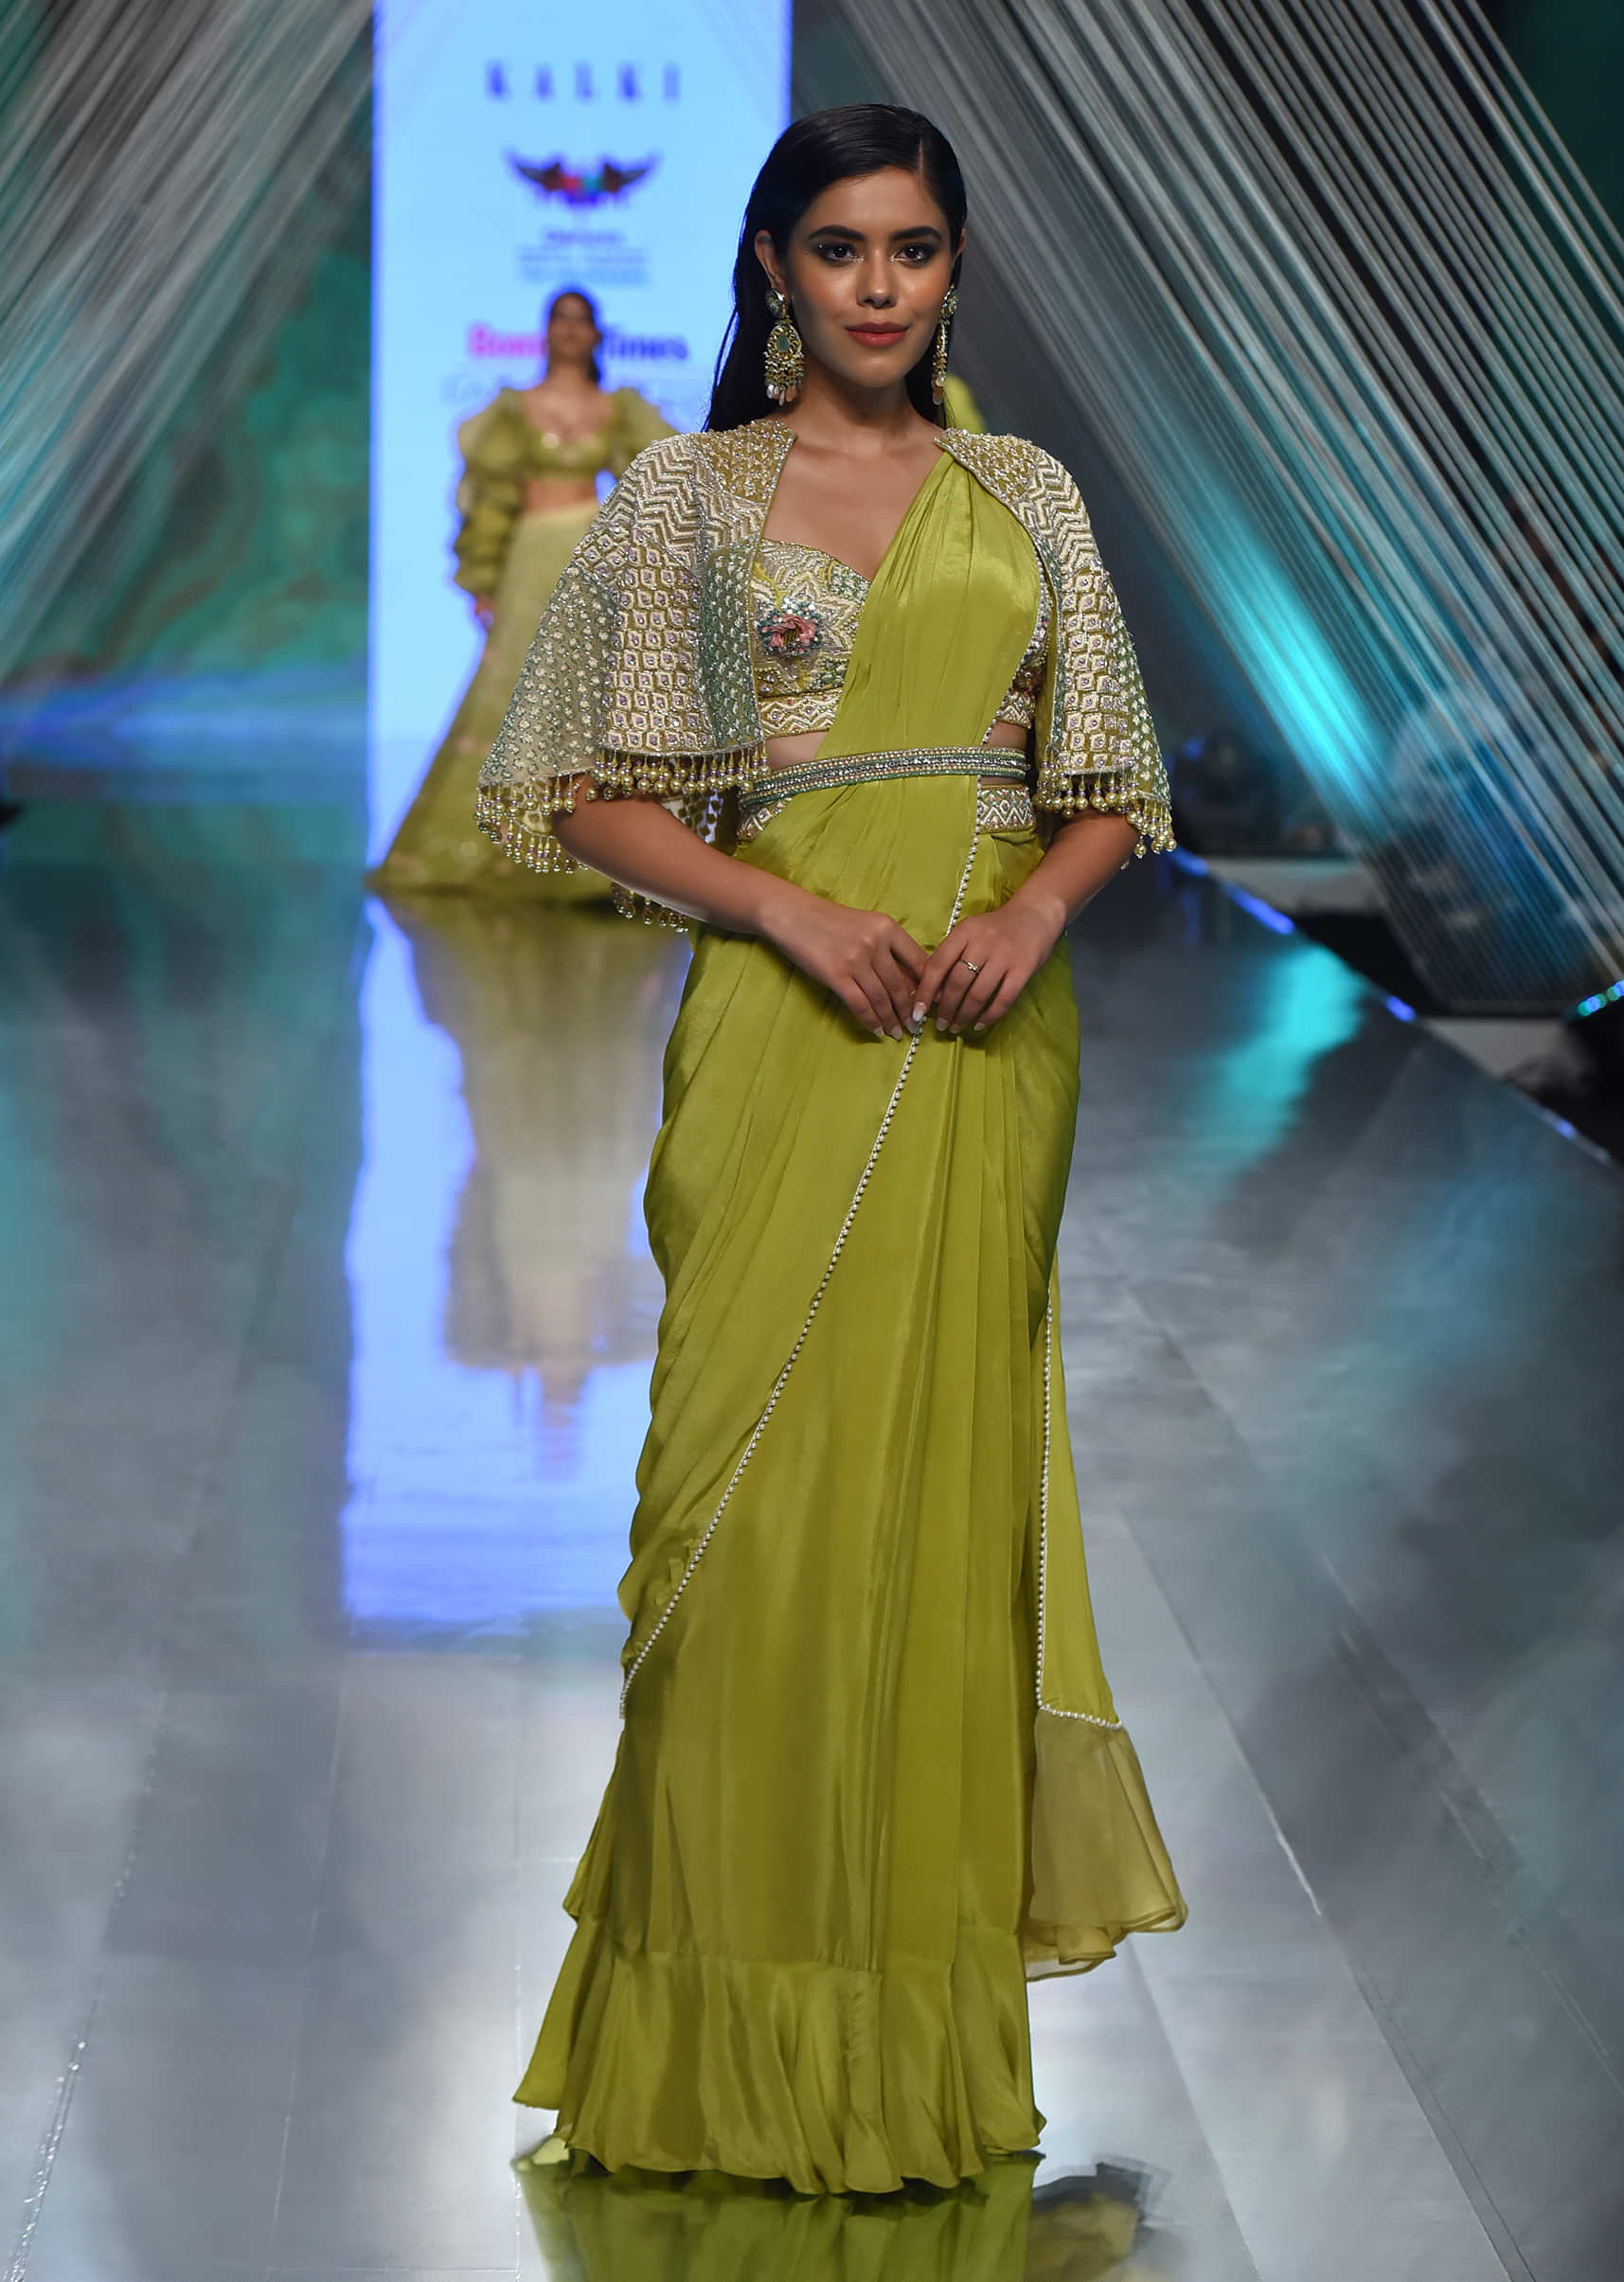 Citrus Ready Pleated Saree With A Net Cape, Crop Top In V Neckline With Cut Out At The Hemline